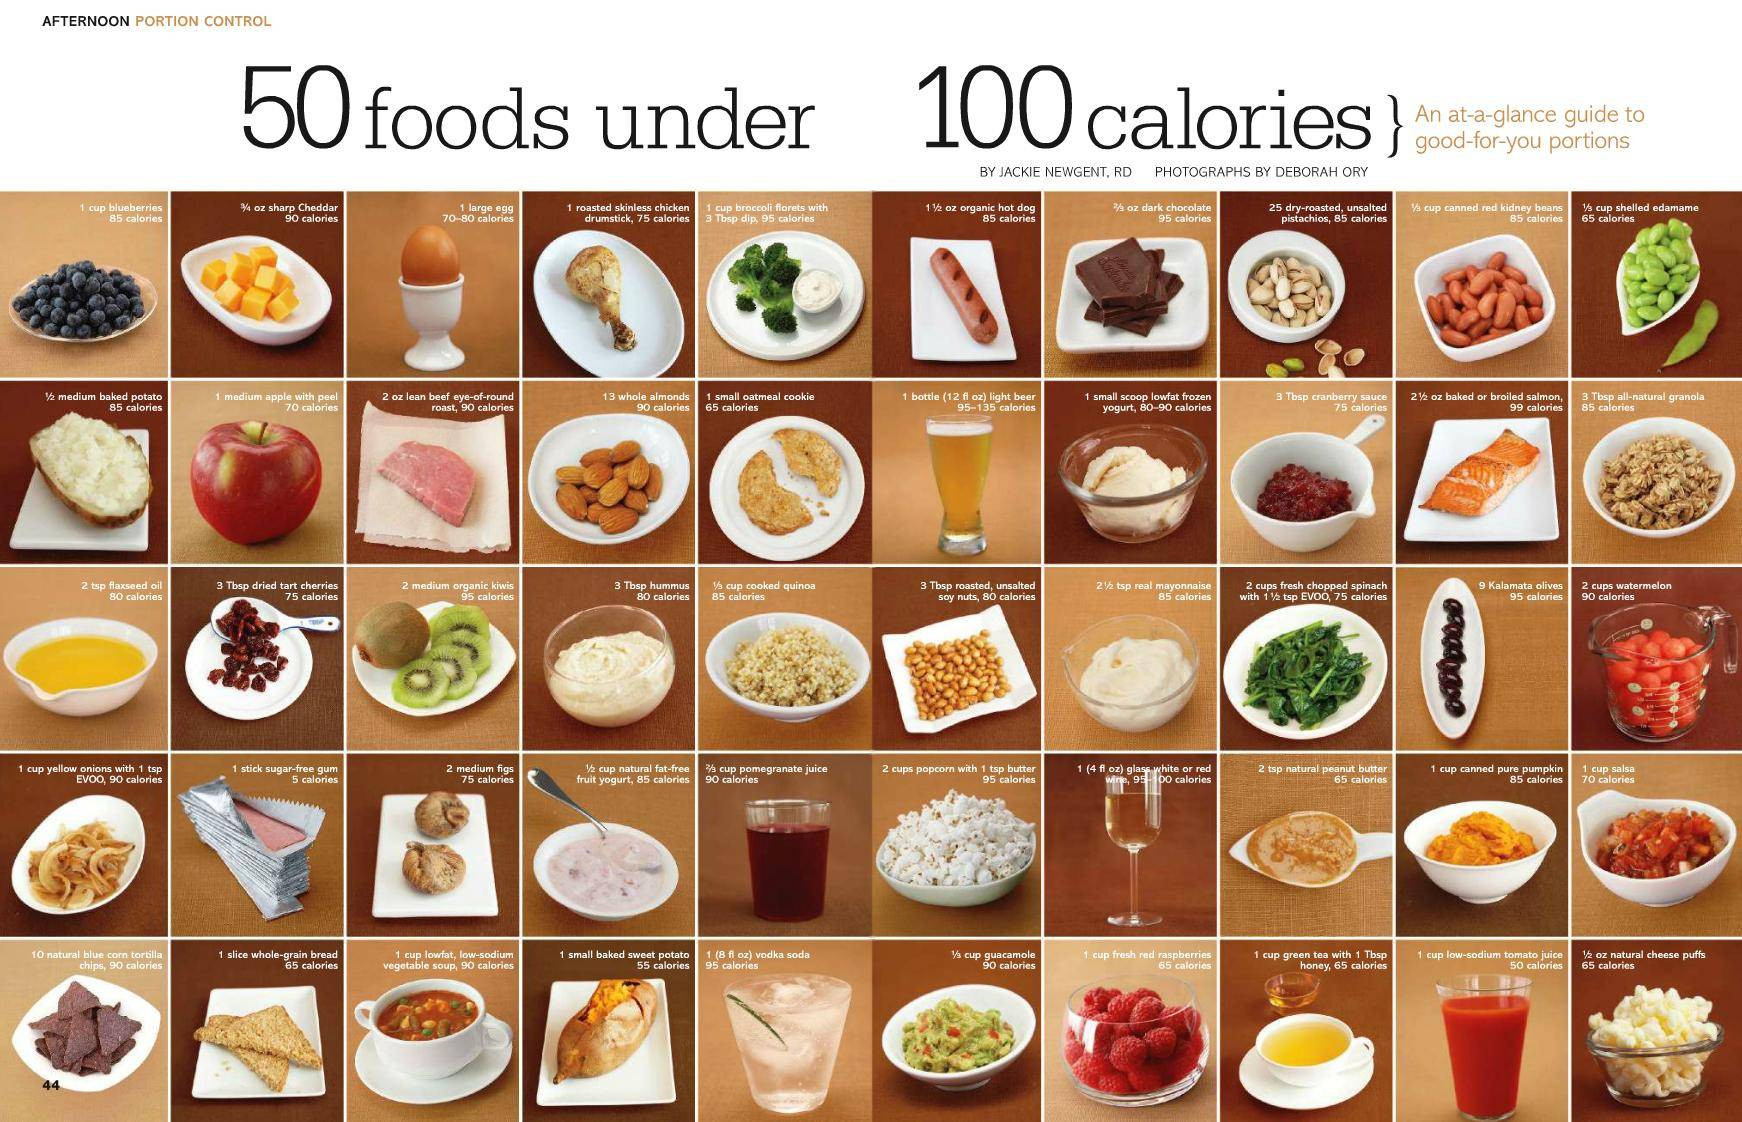 100 Calorie Snacks List
 Home Life Weekly 50 Foods Under 100 Calories Home Life